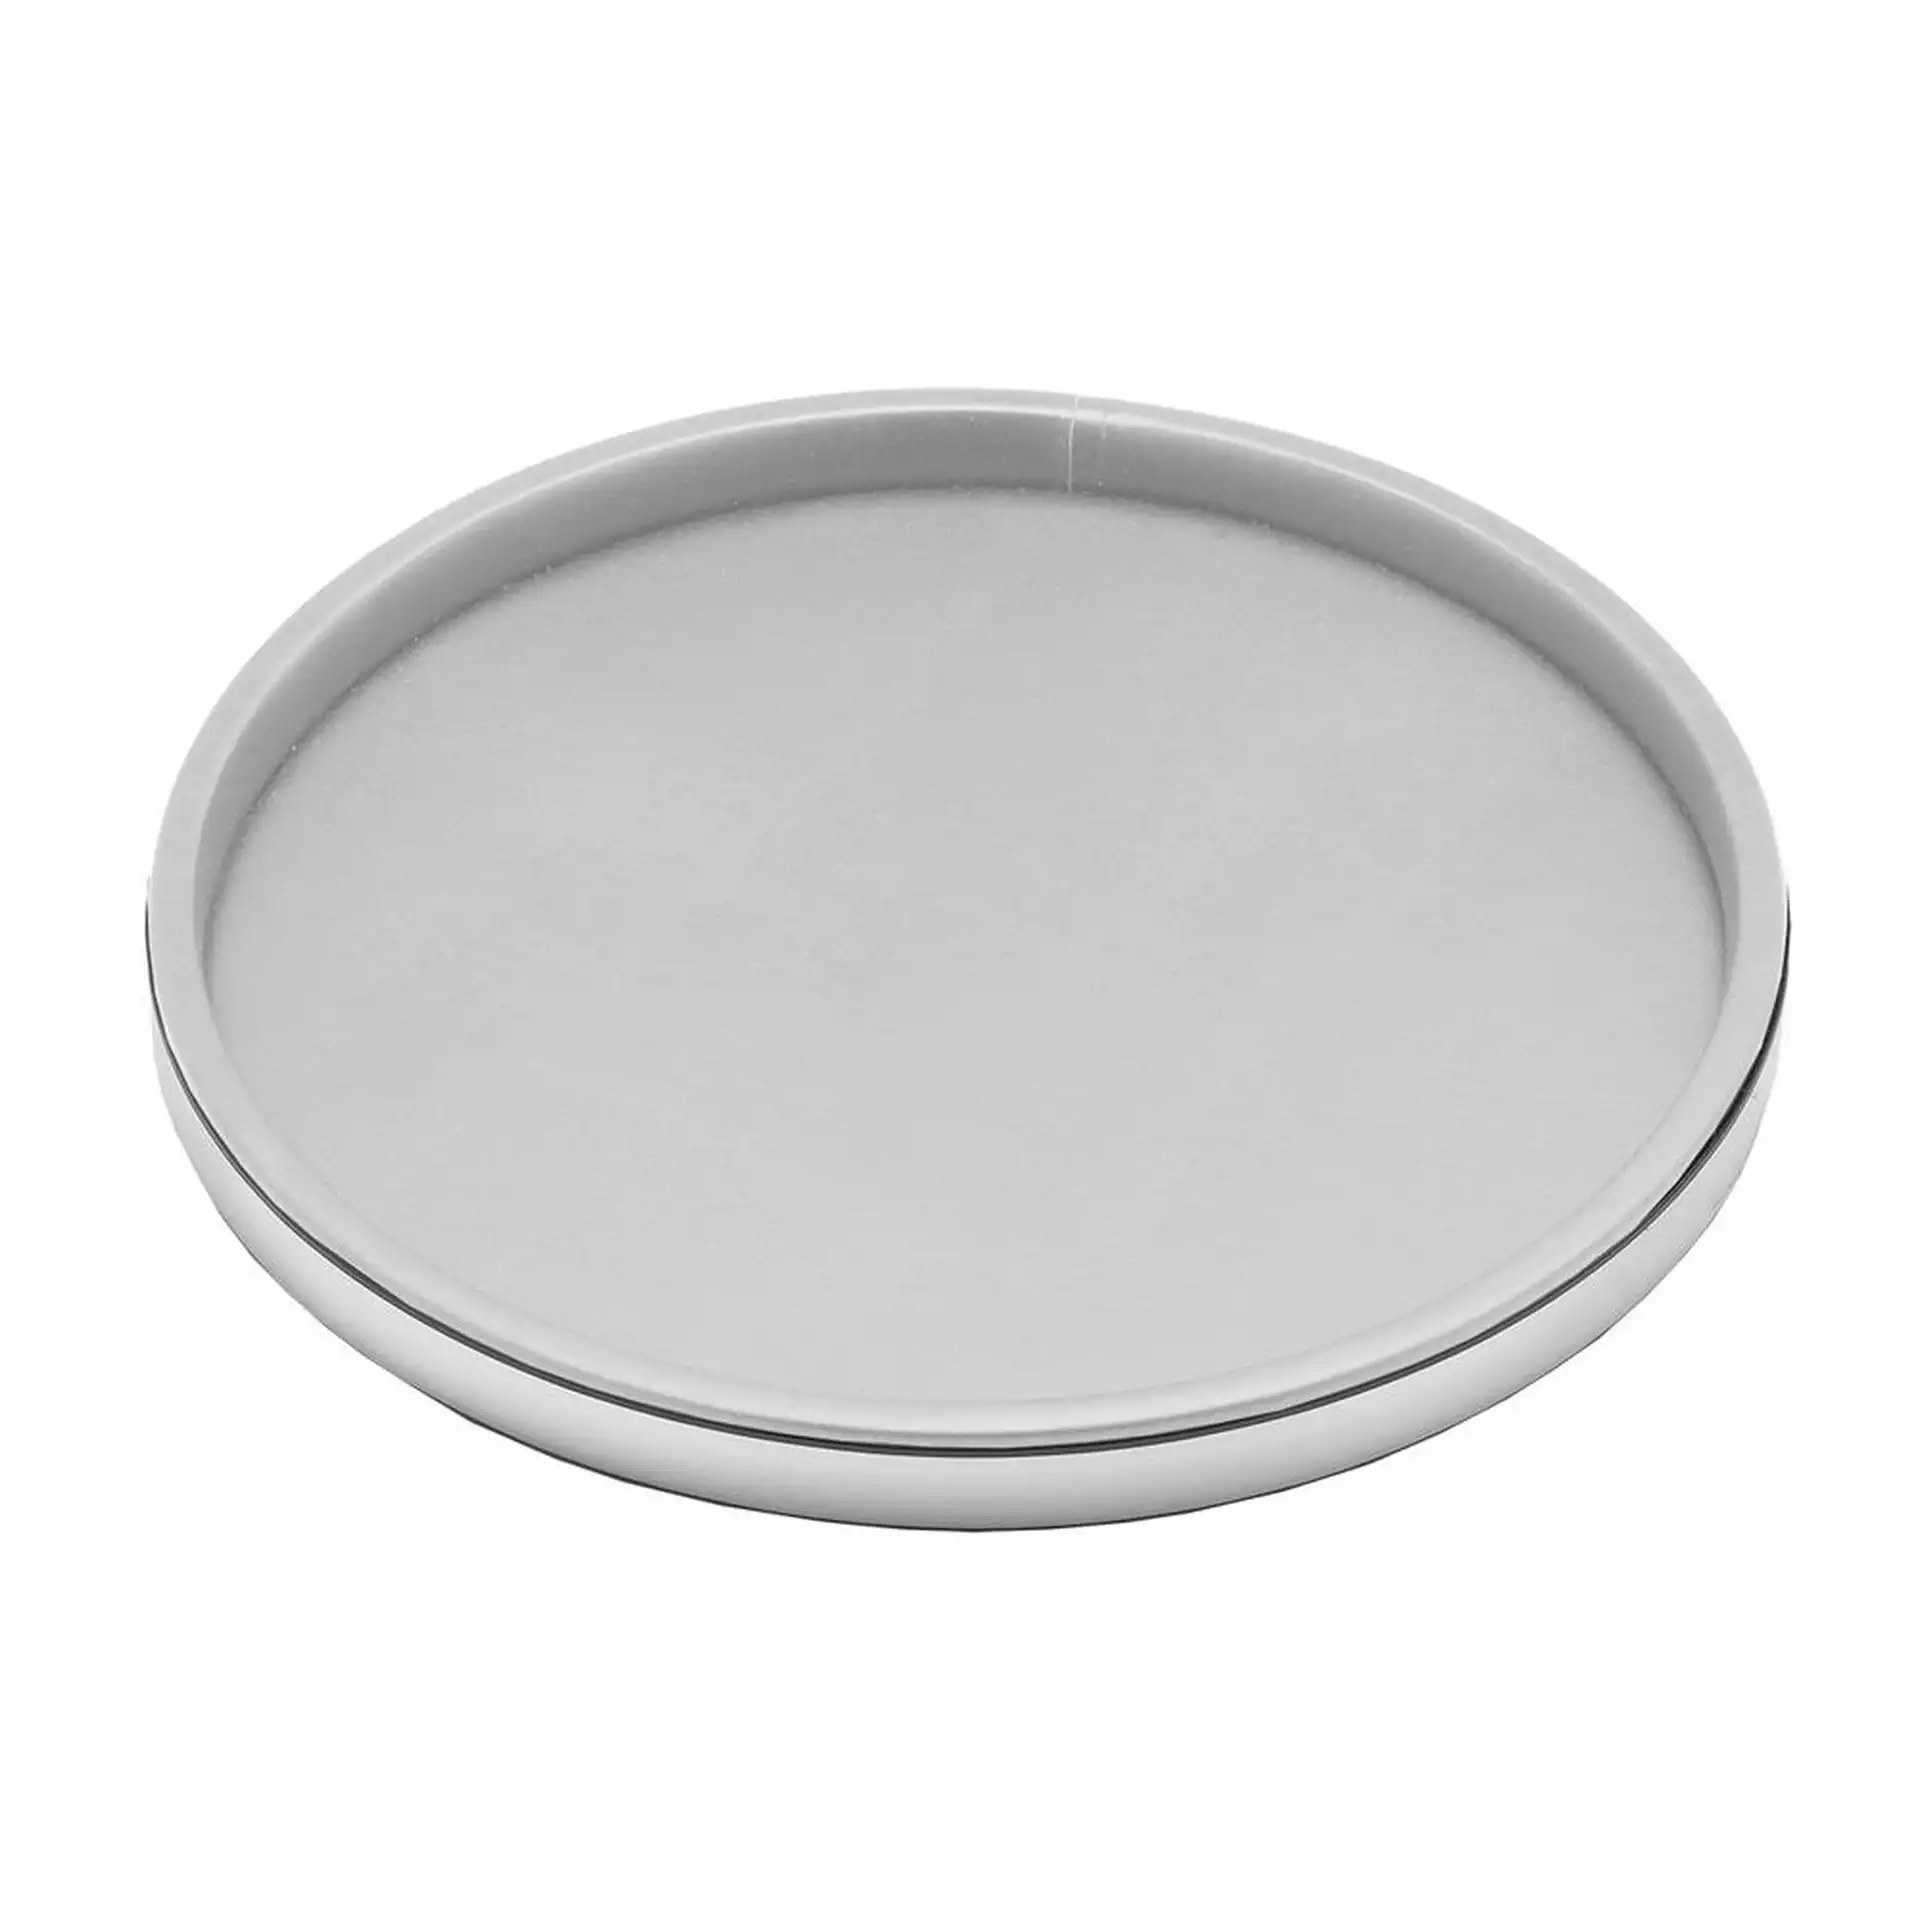 Sophisticates 14 in. Round Serving Tray in White and Brushed Chrome